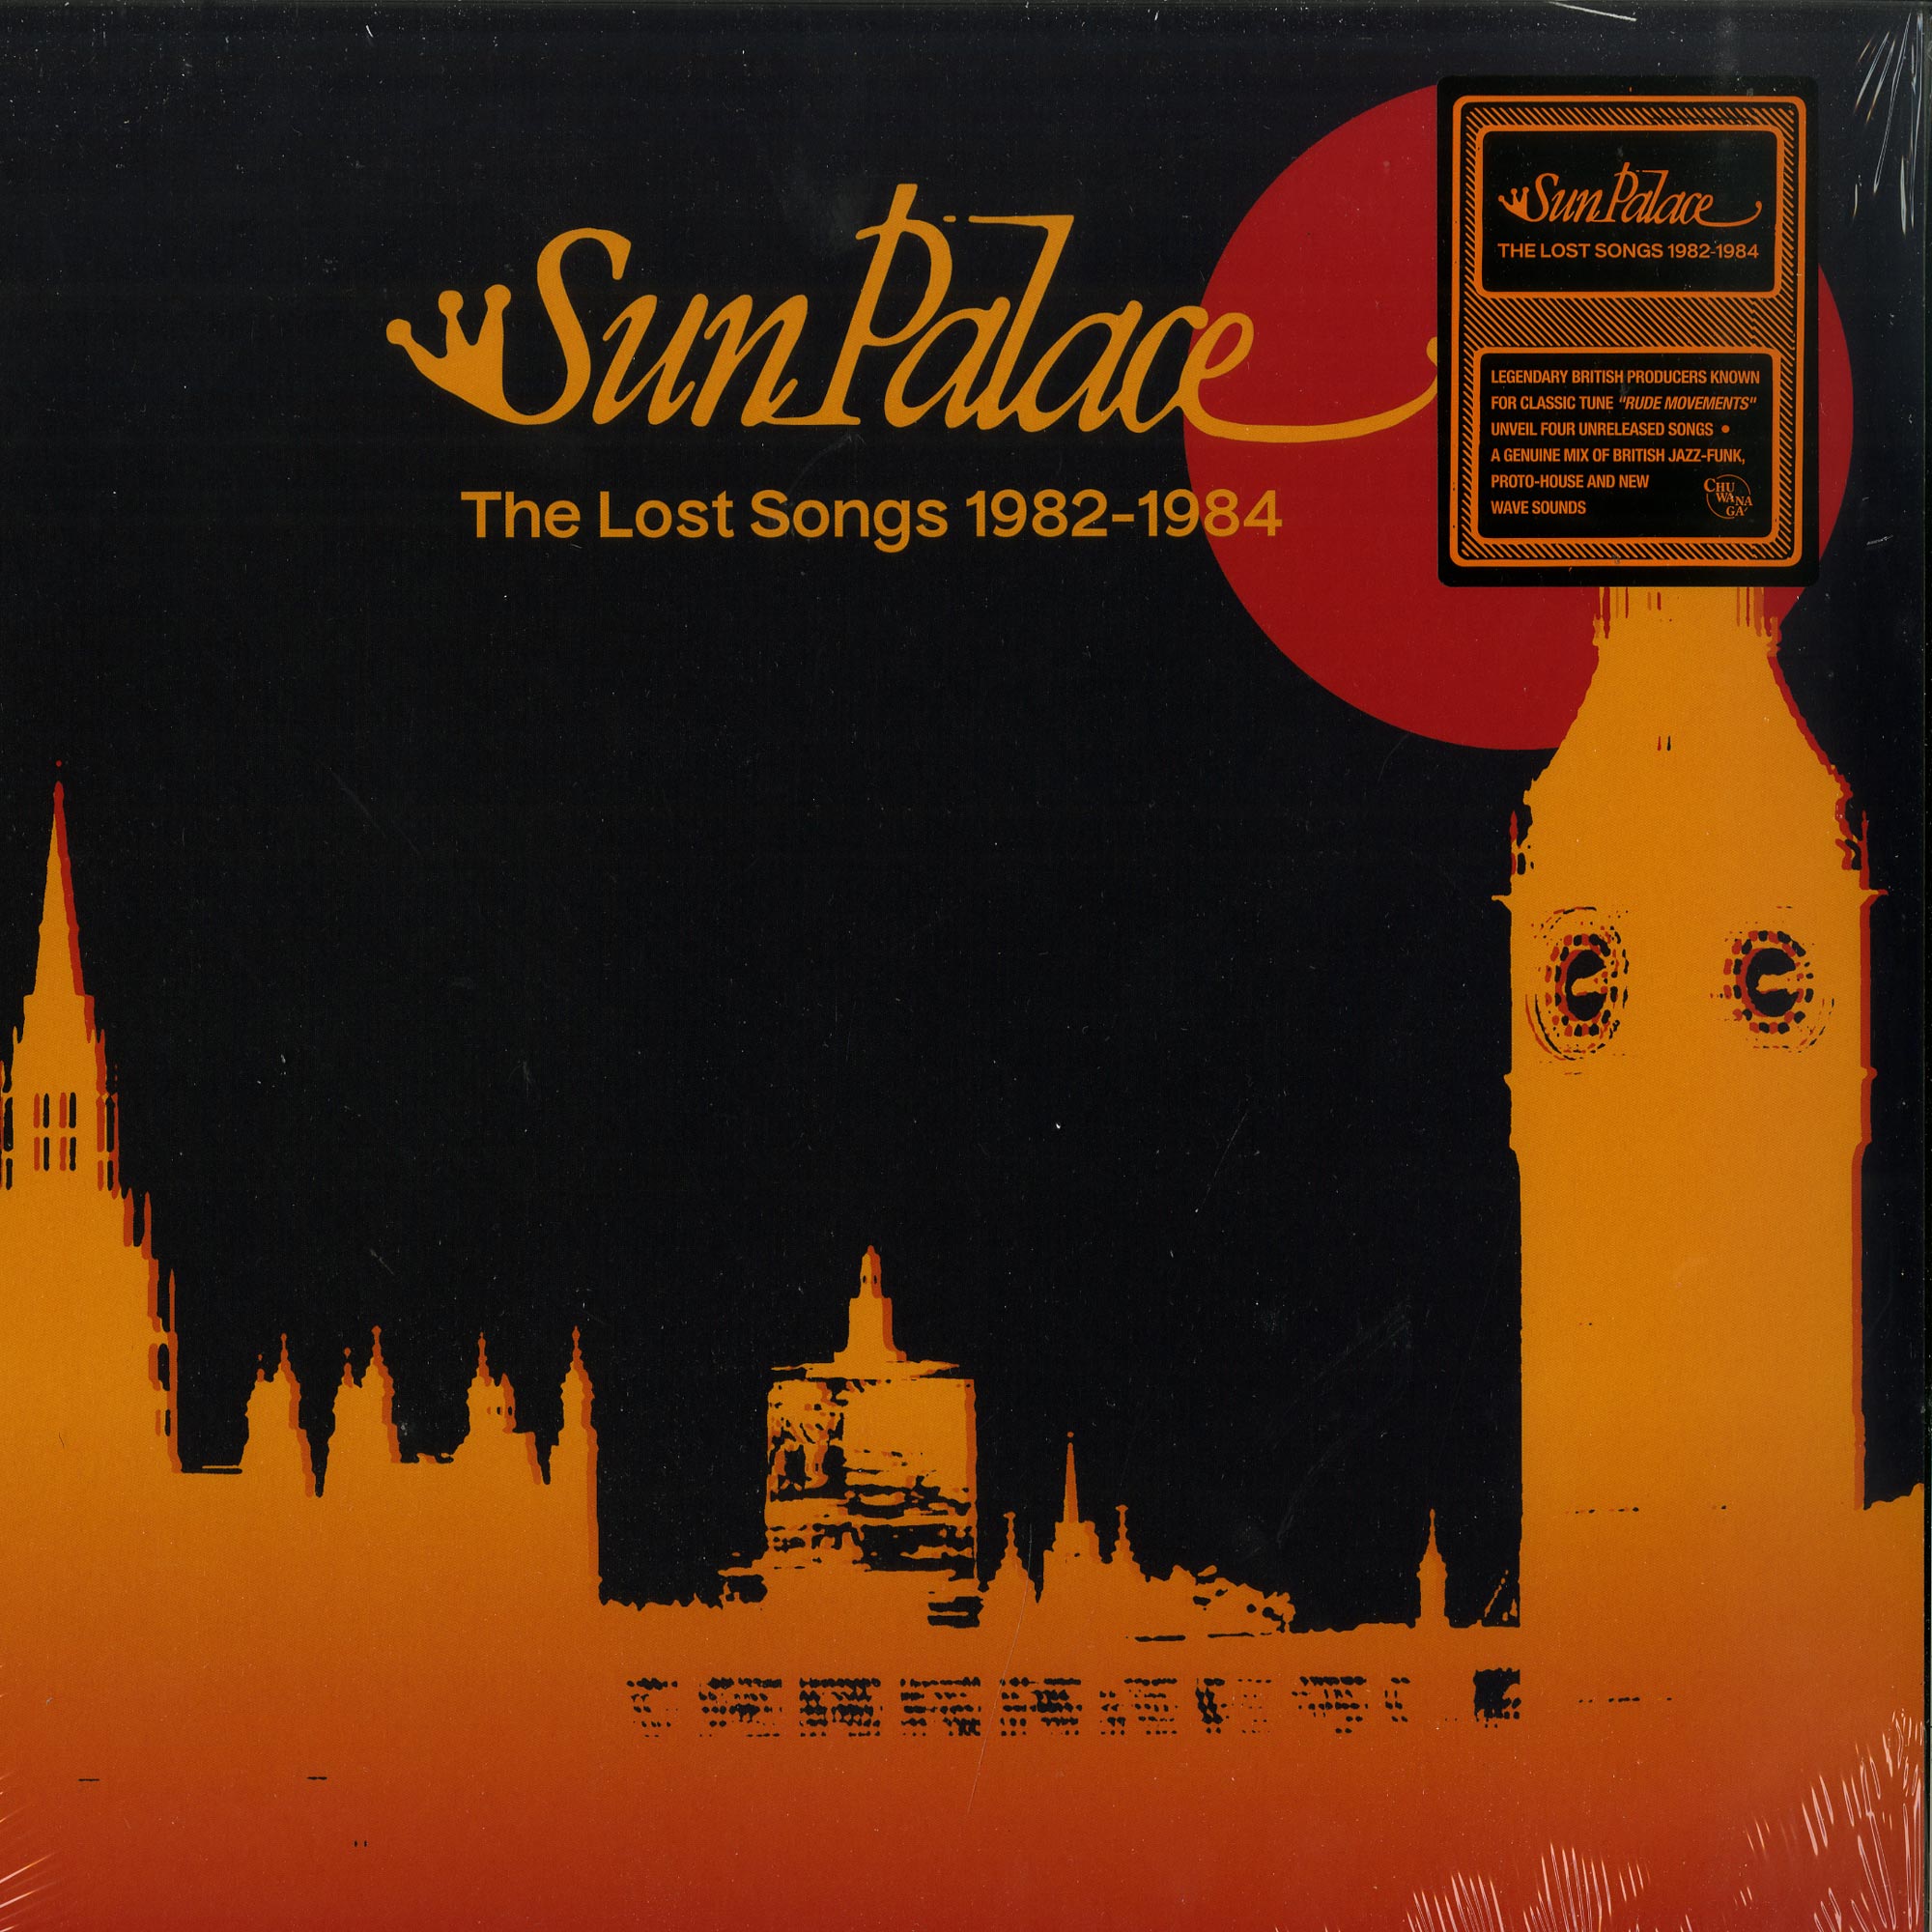 Sunpalace - THE LOST SONGS 1982-1984